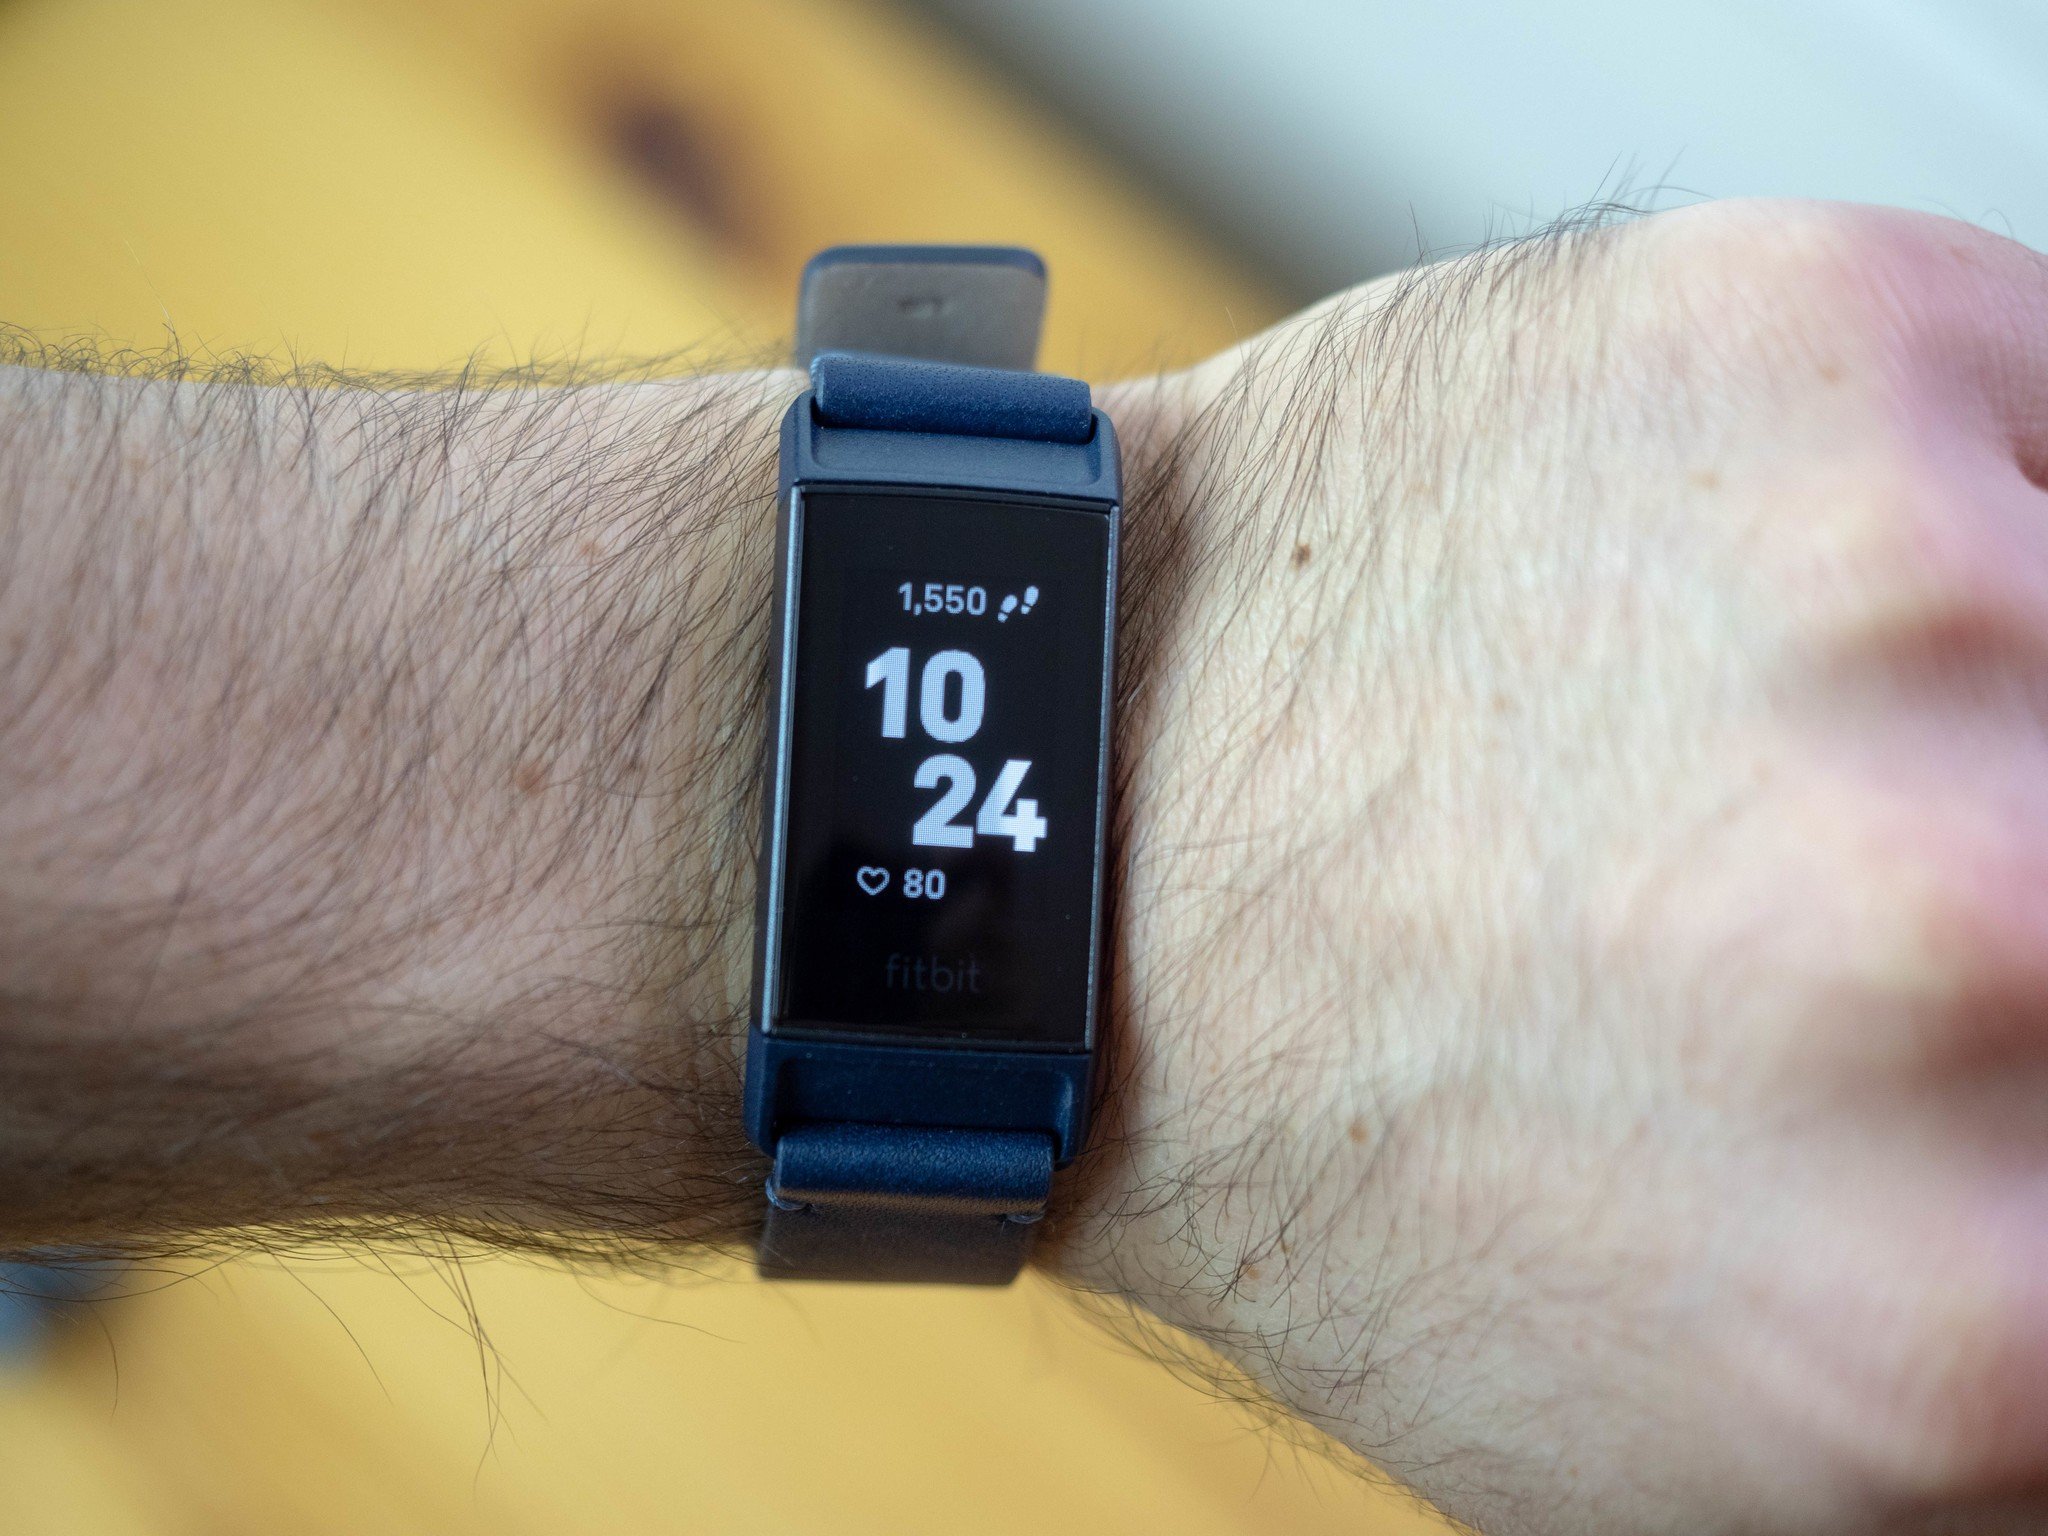   Fitbit Charge 3 